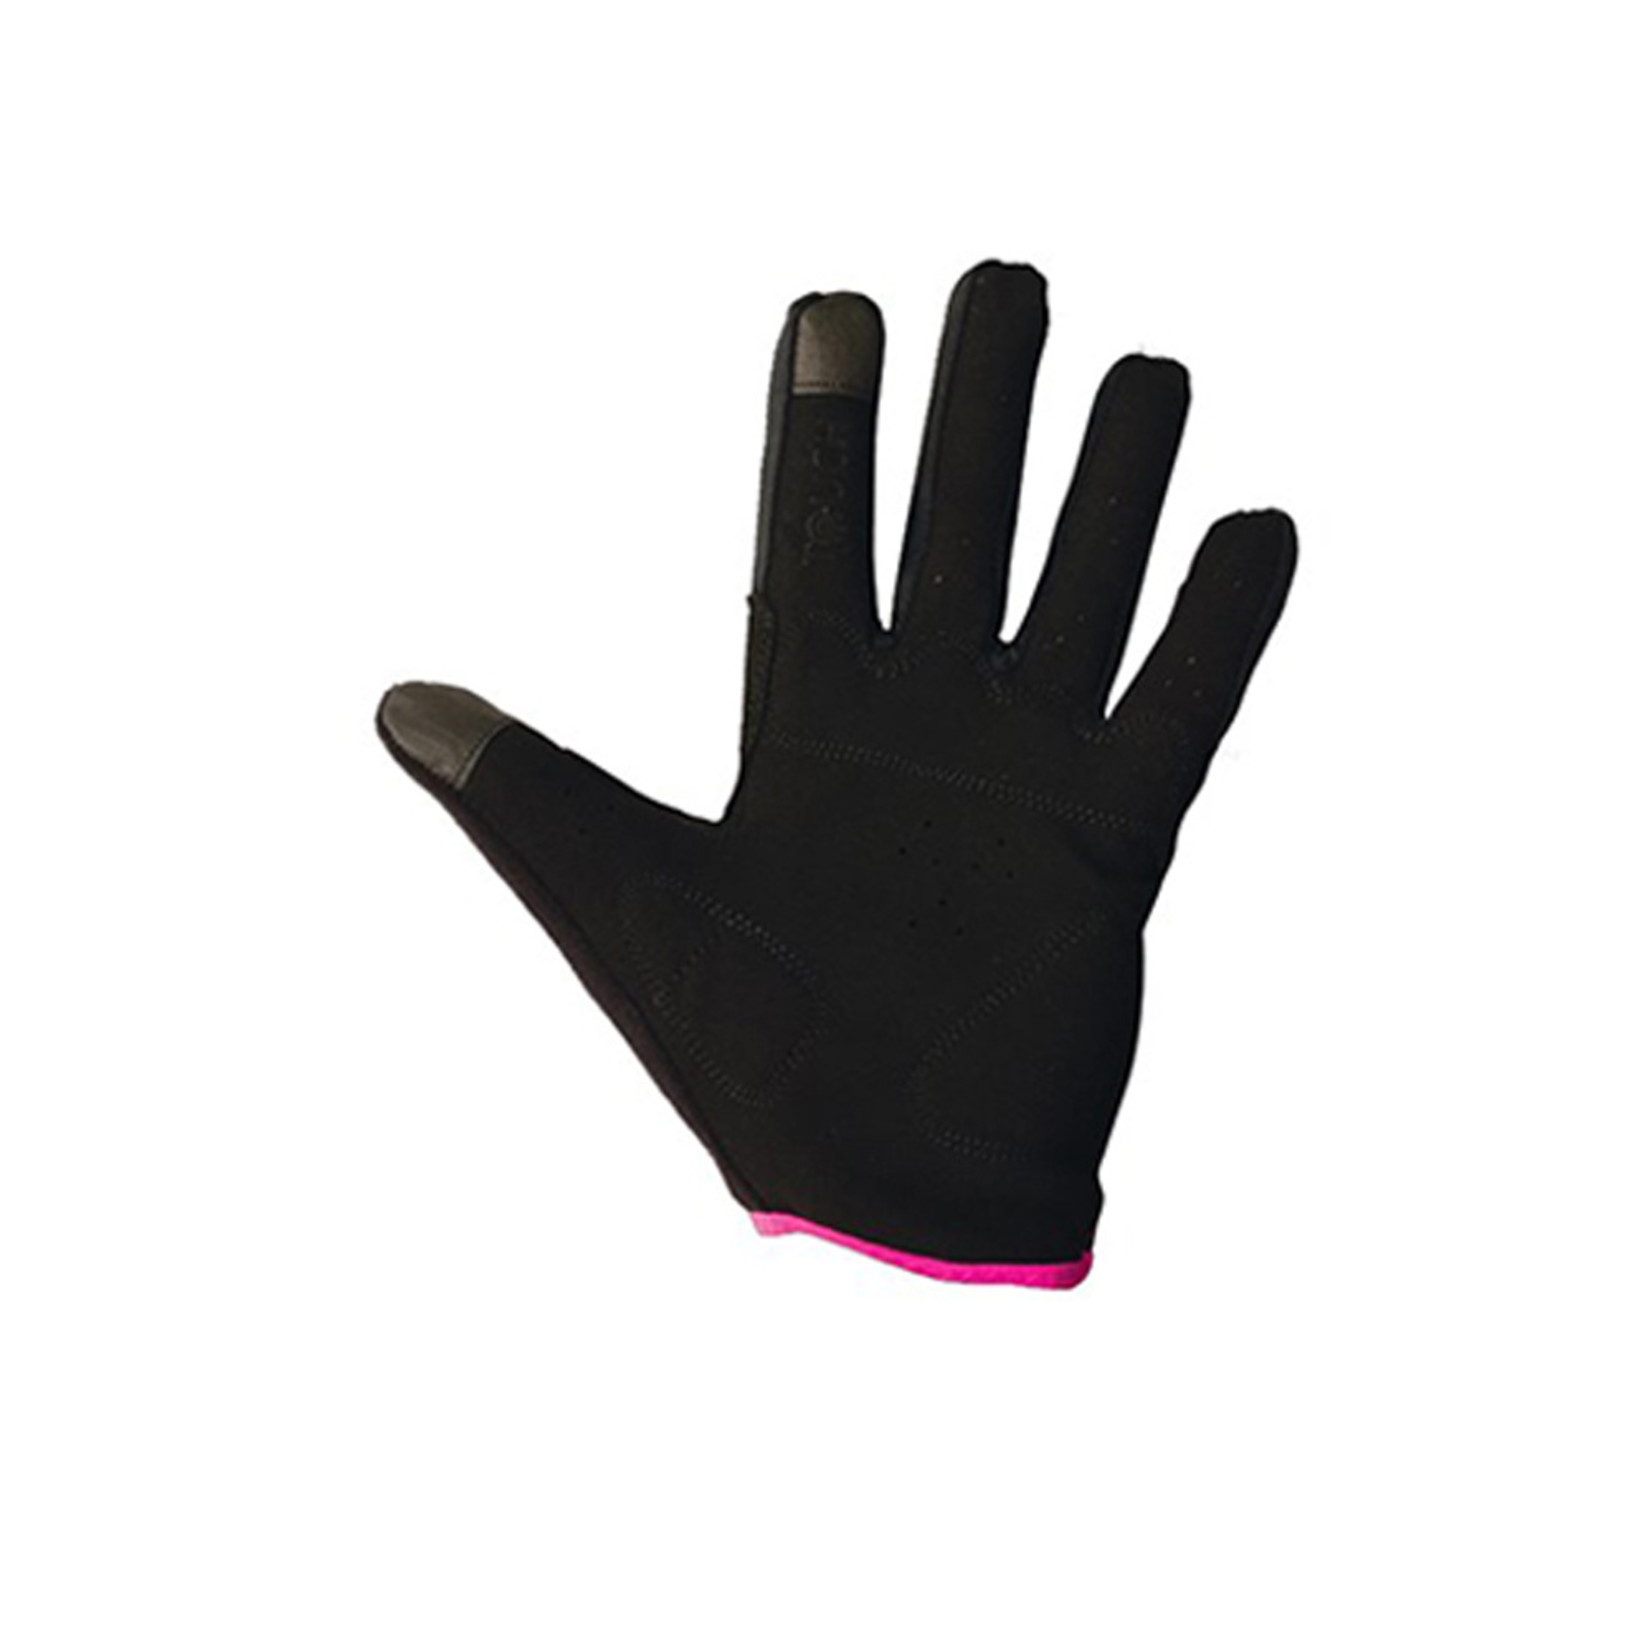 Azur Azur Bike/Cycling Lightweight Glove - L60 Series - Breathable - Pink - X-Small